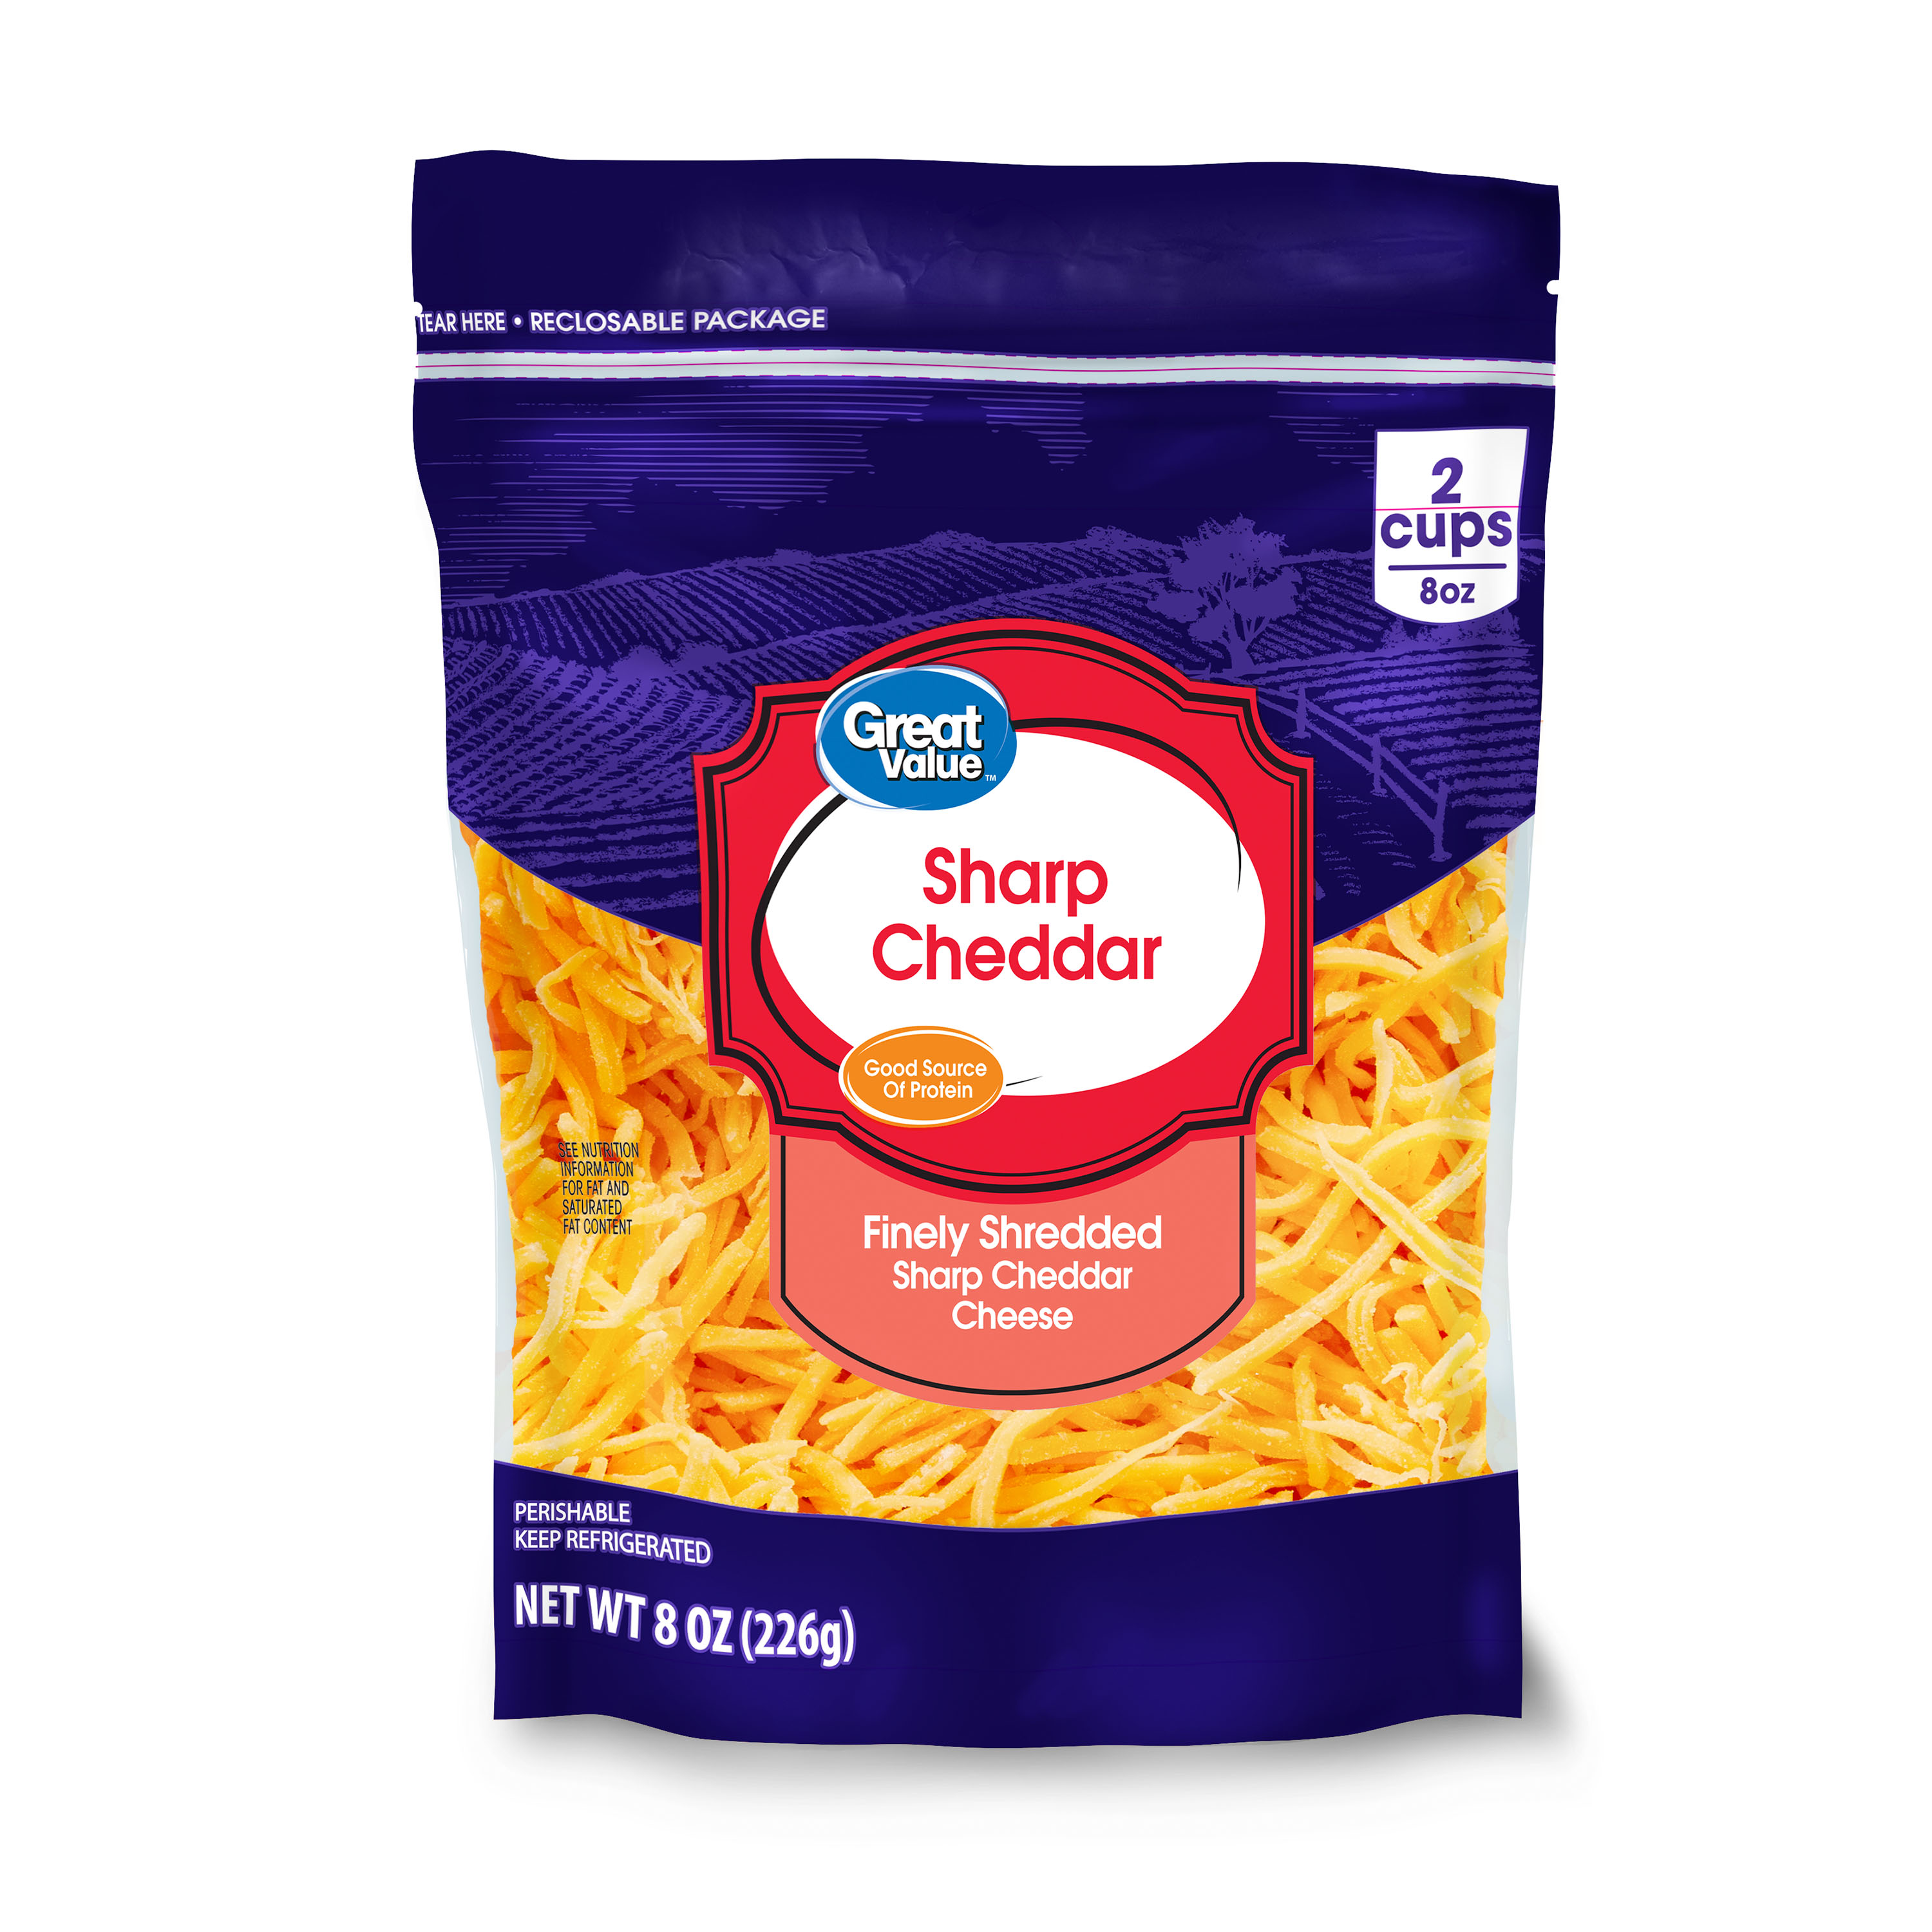 Great Value Finely Shredded Sharp Cheddar Cheese, 8 oz - image 1 of 9